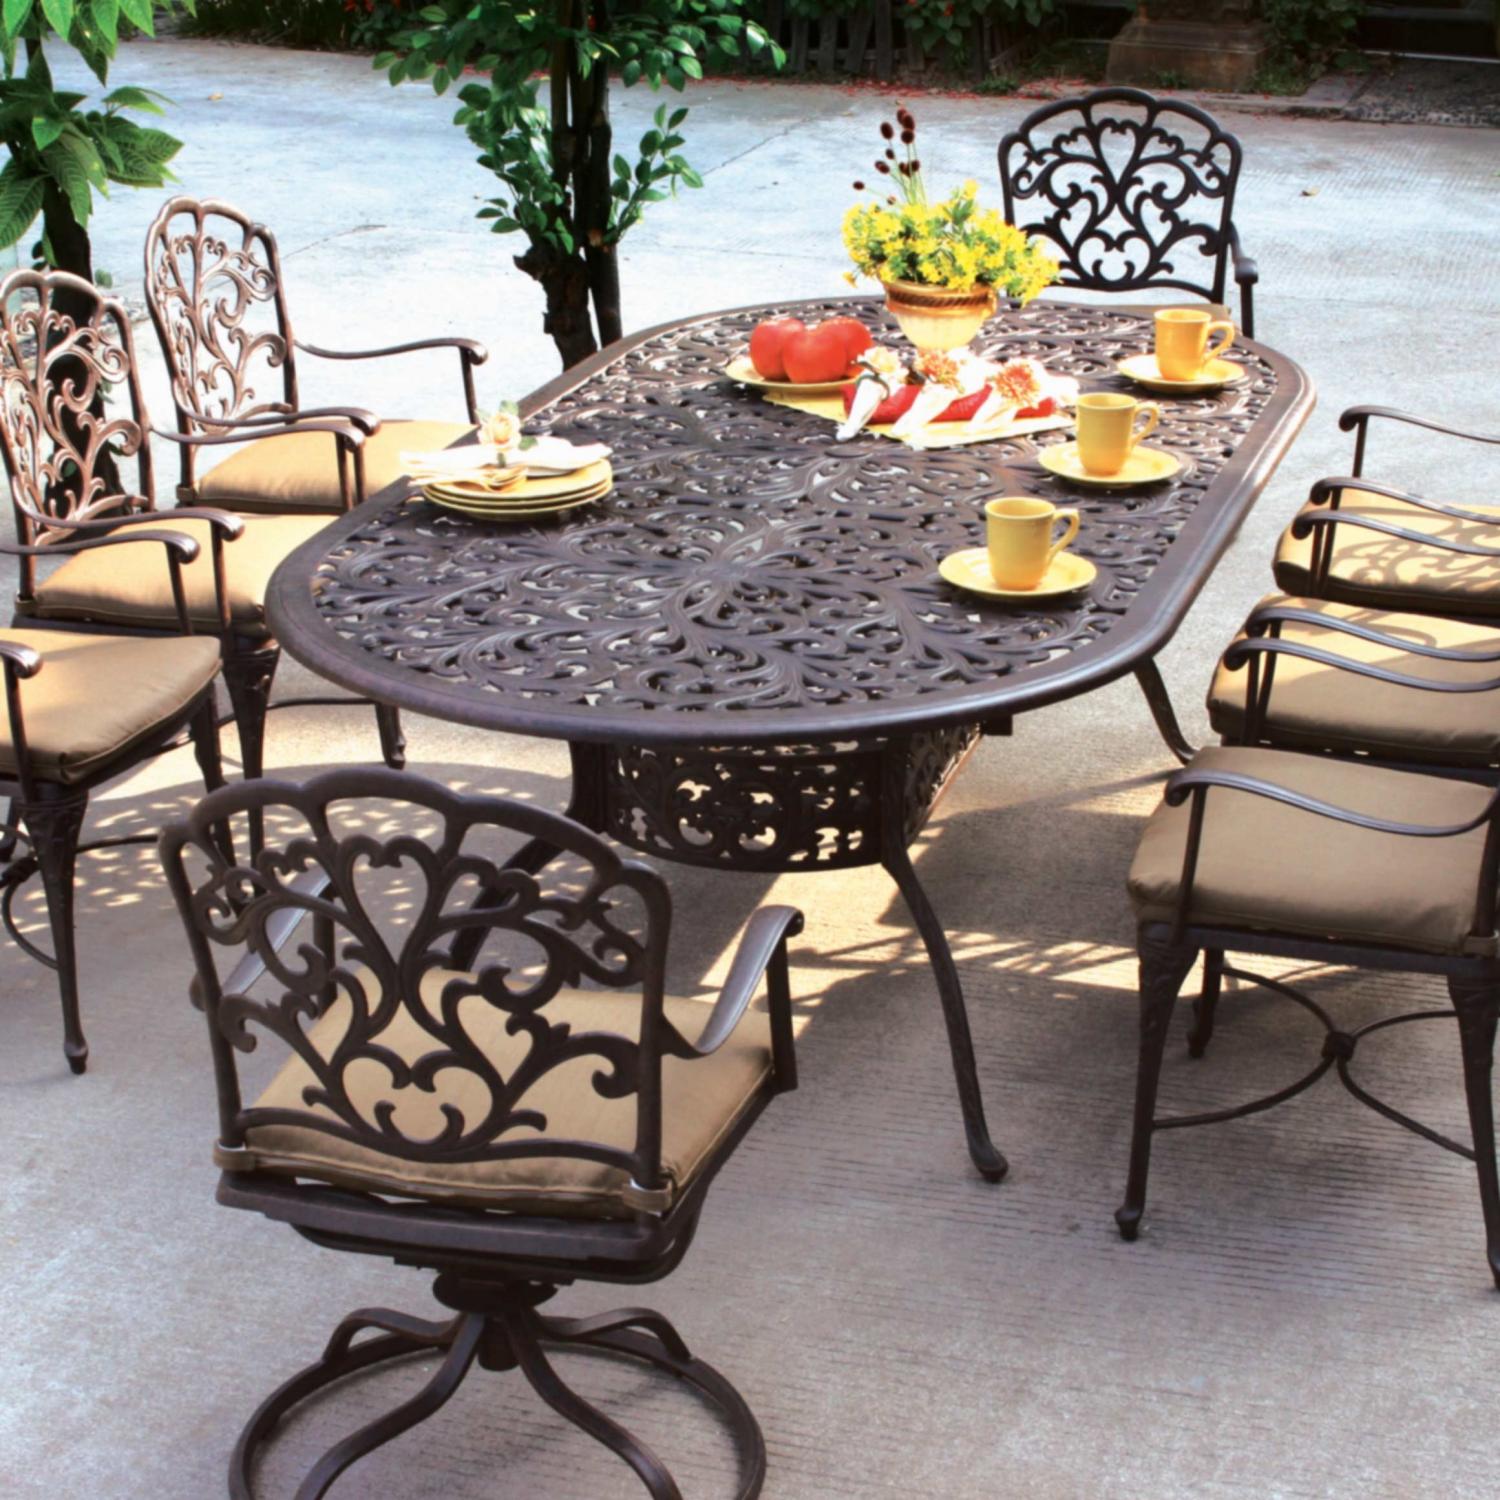 patio dining sets for small spaces photo - 5